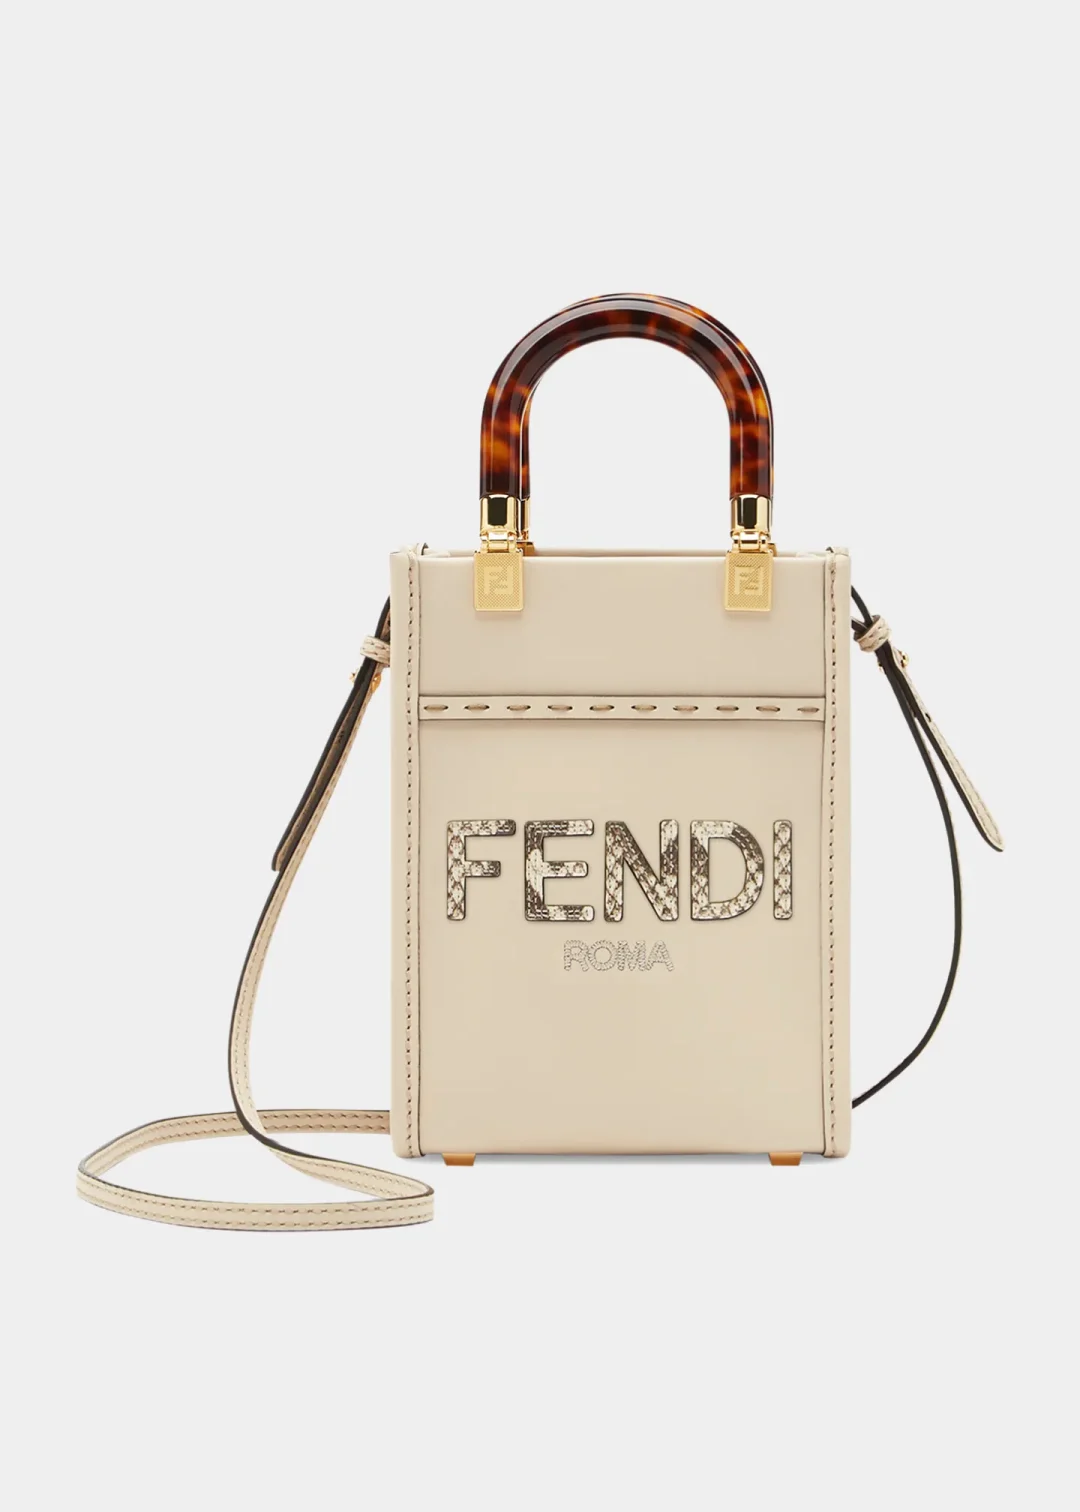 21 Best Fendi Bags For A Chic Look Story 